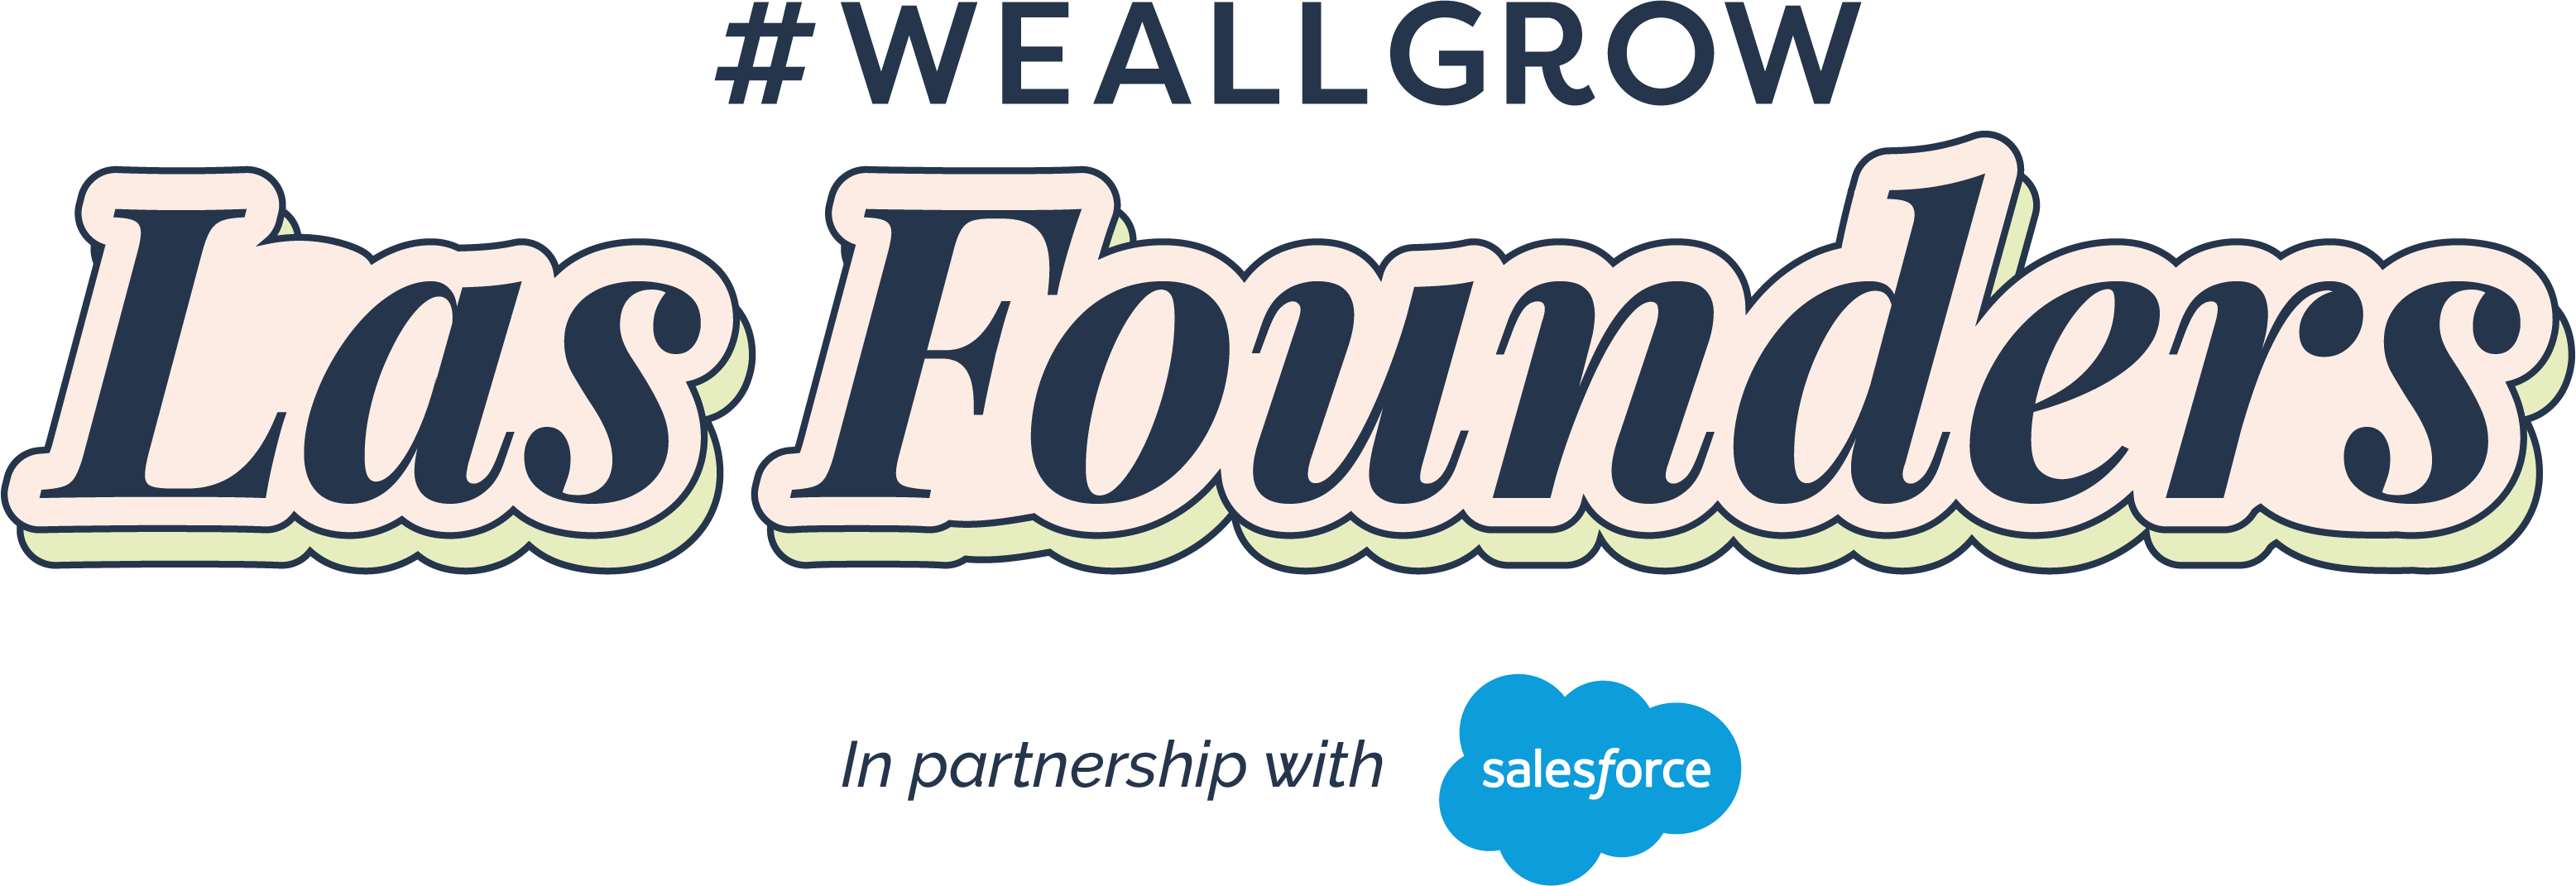 #weallgrow Las Founders. In partnership with Salesforce.